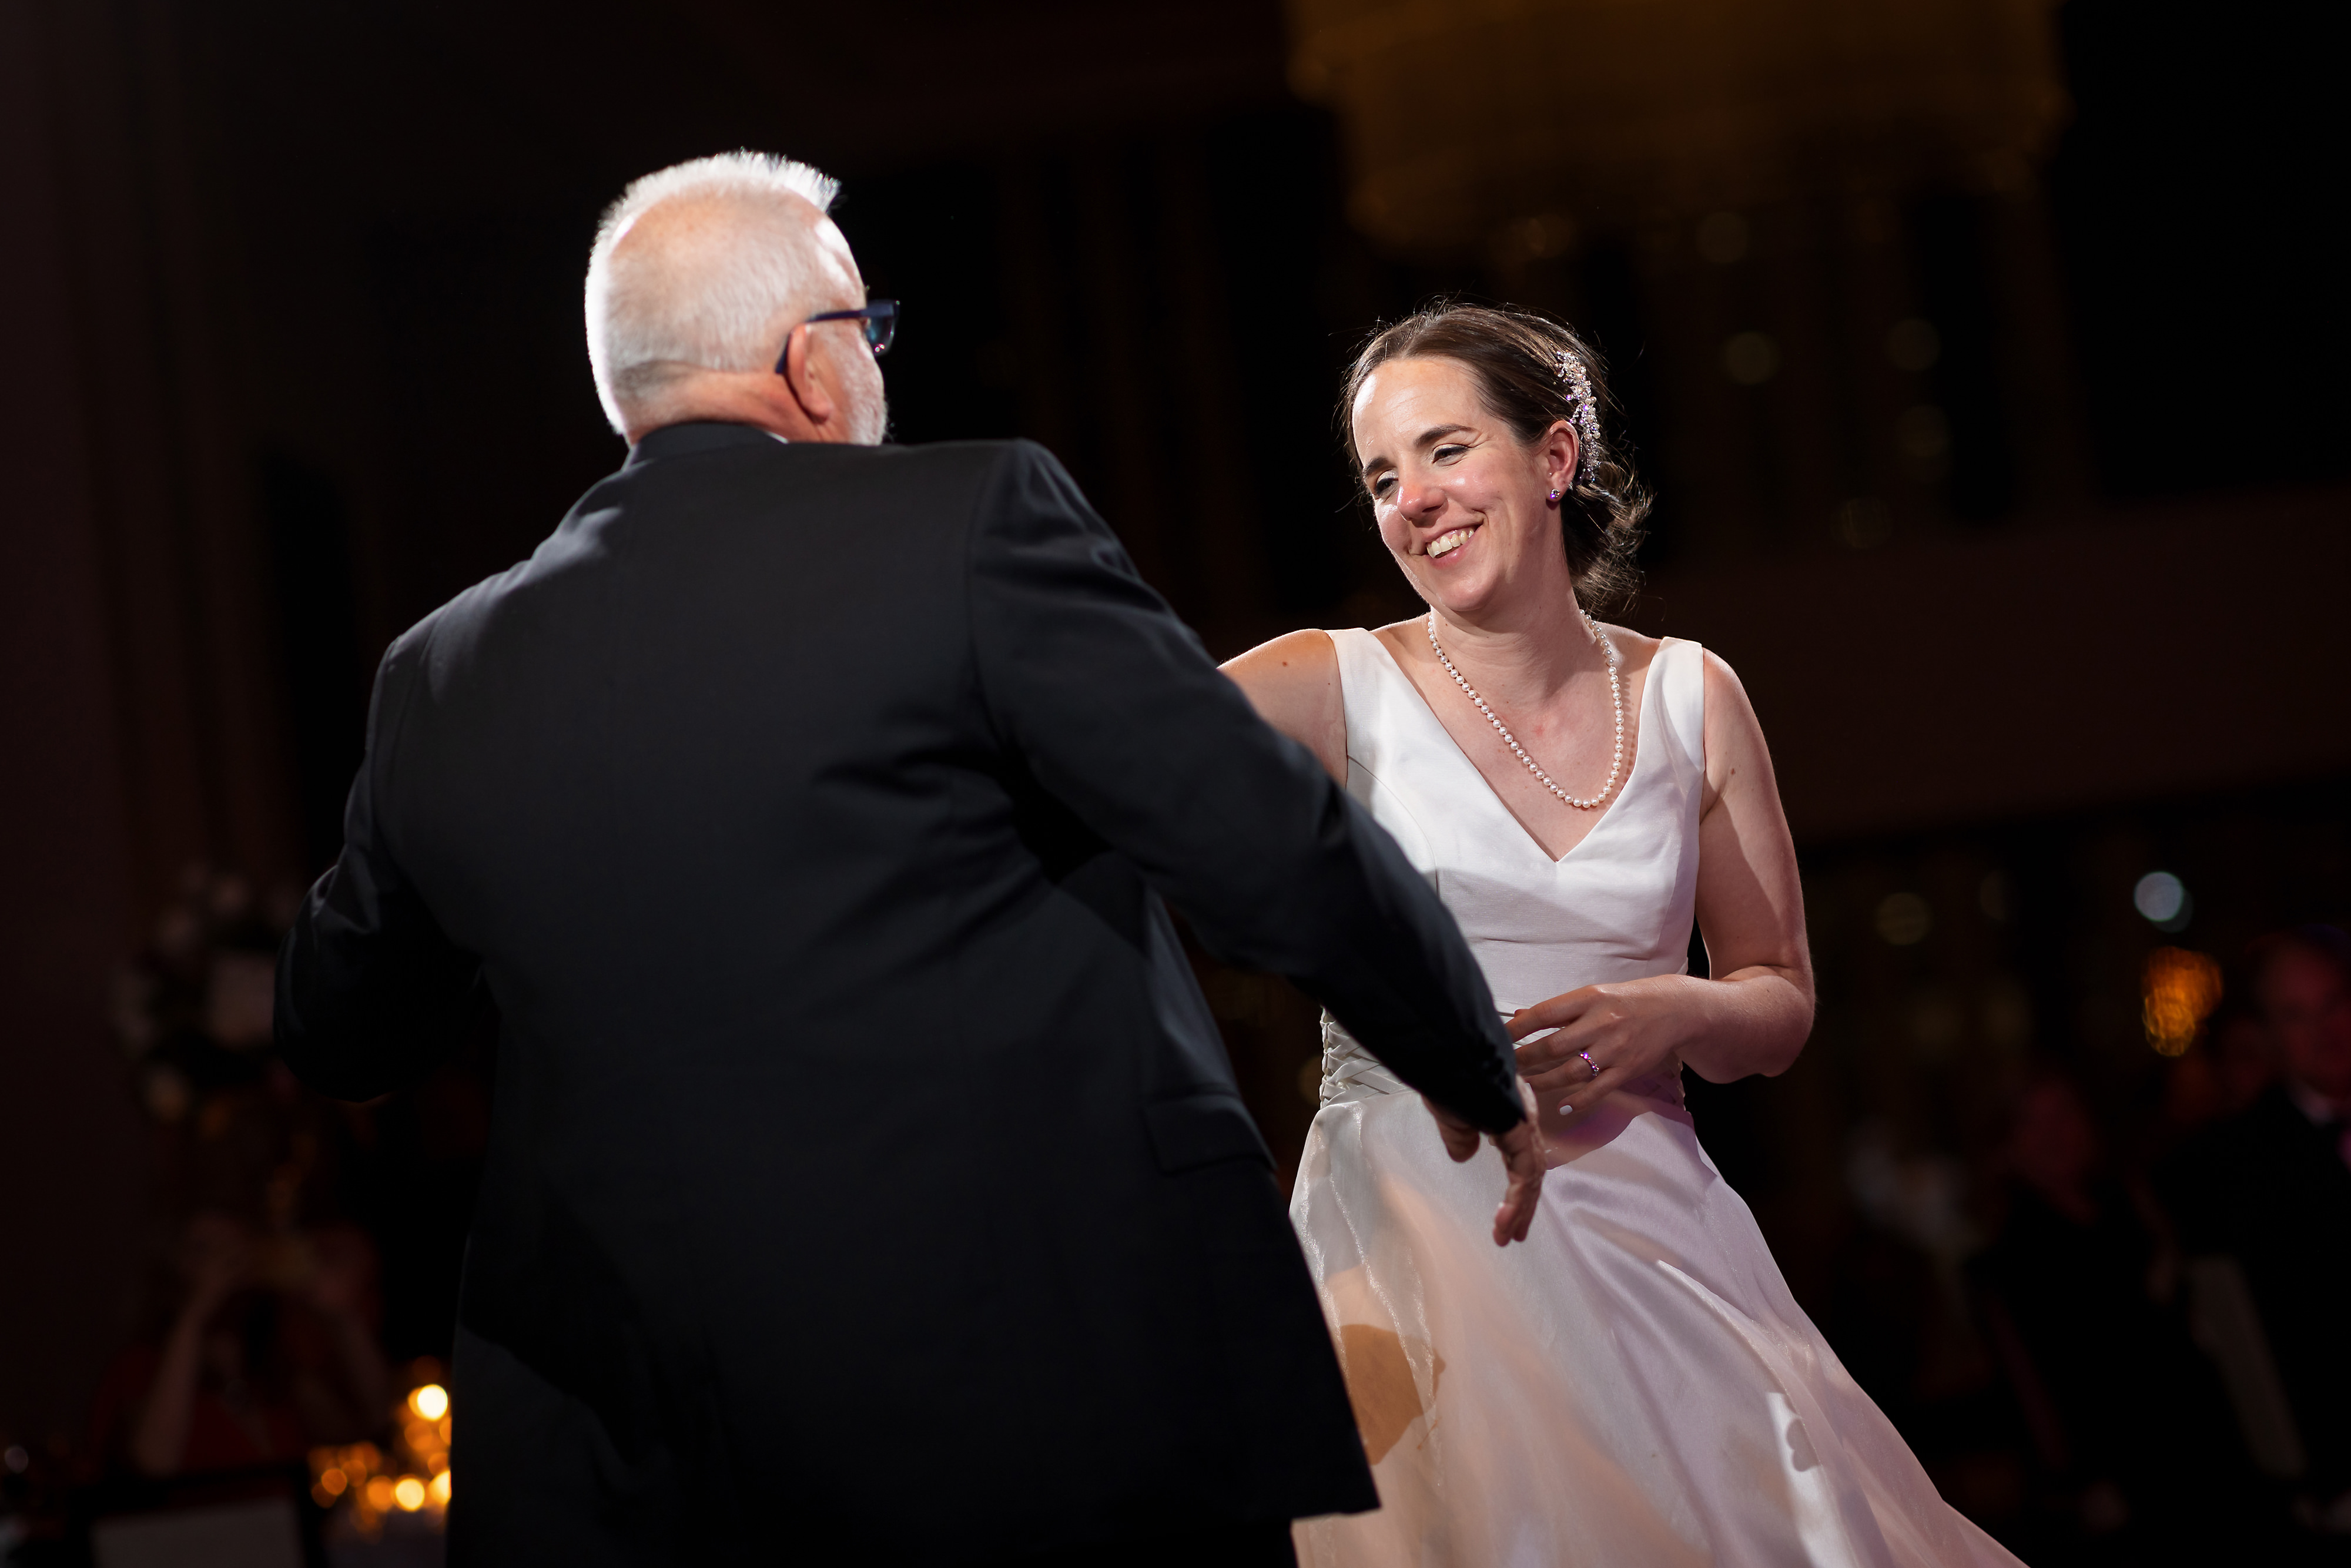 Bride and father share first dance during wedding reception at The Langham Hotel in downtown Chicago